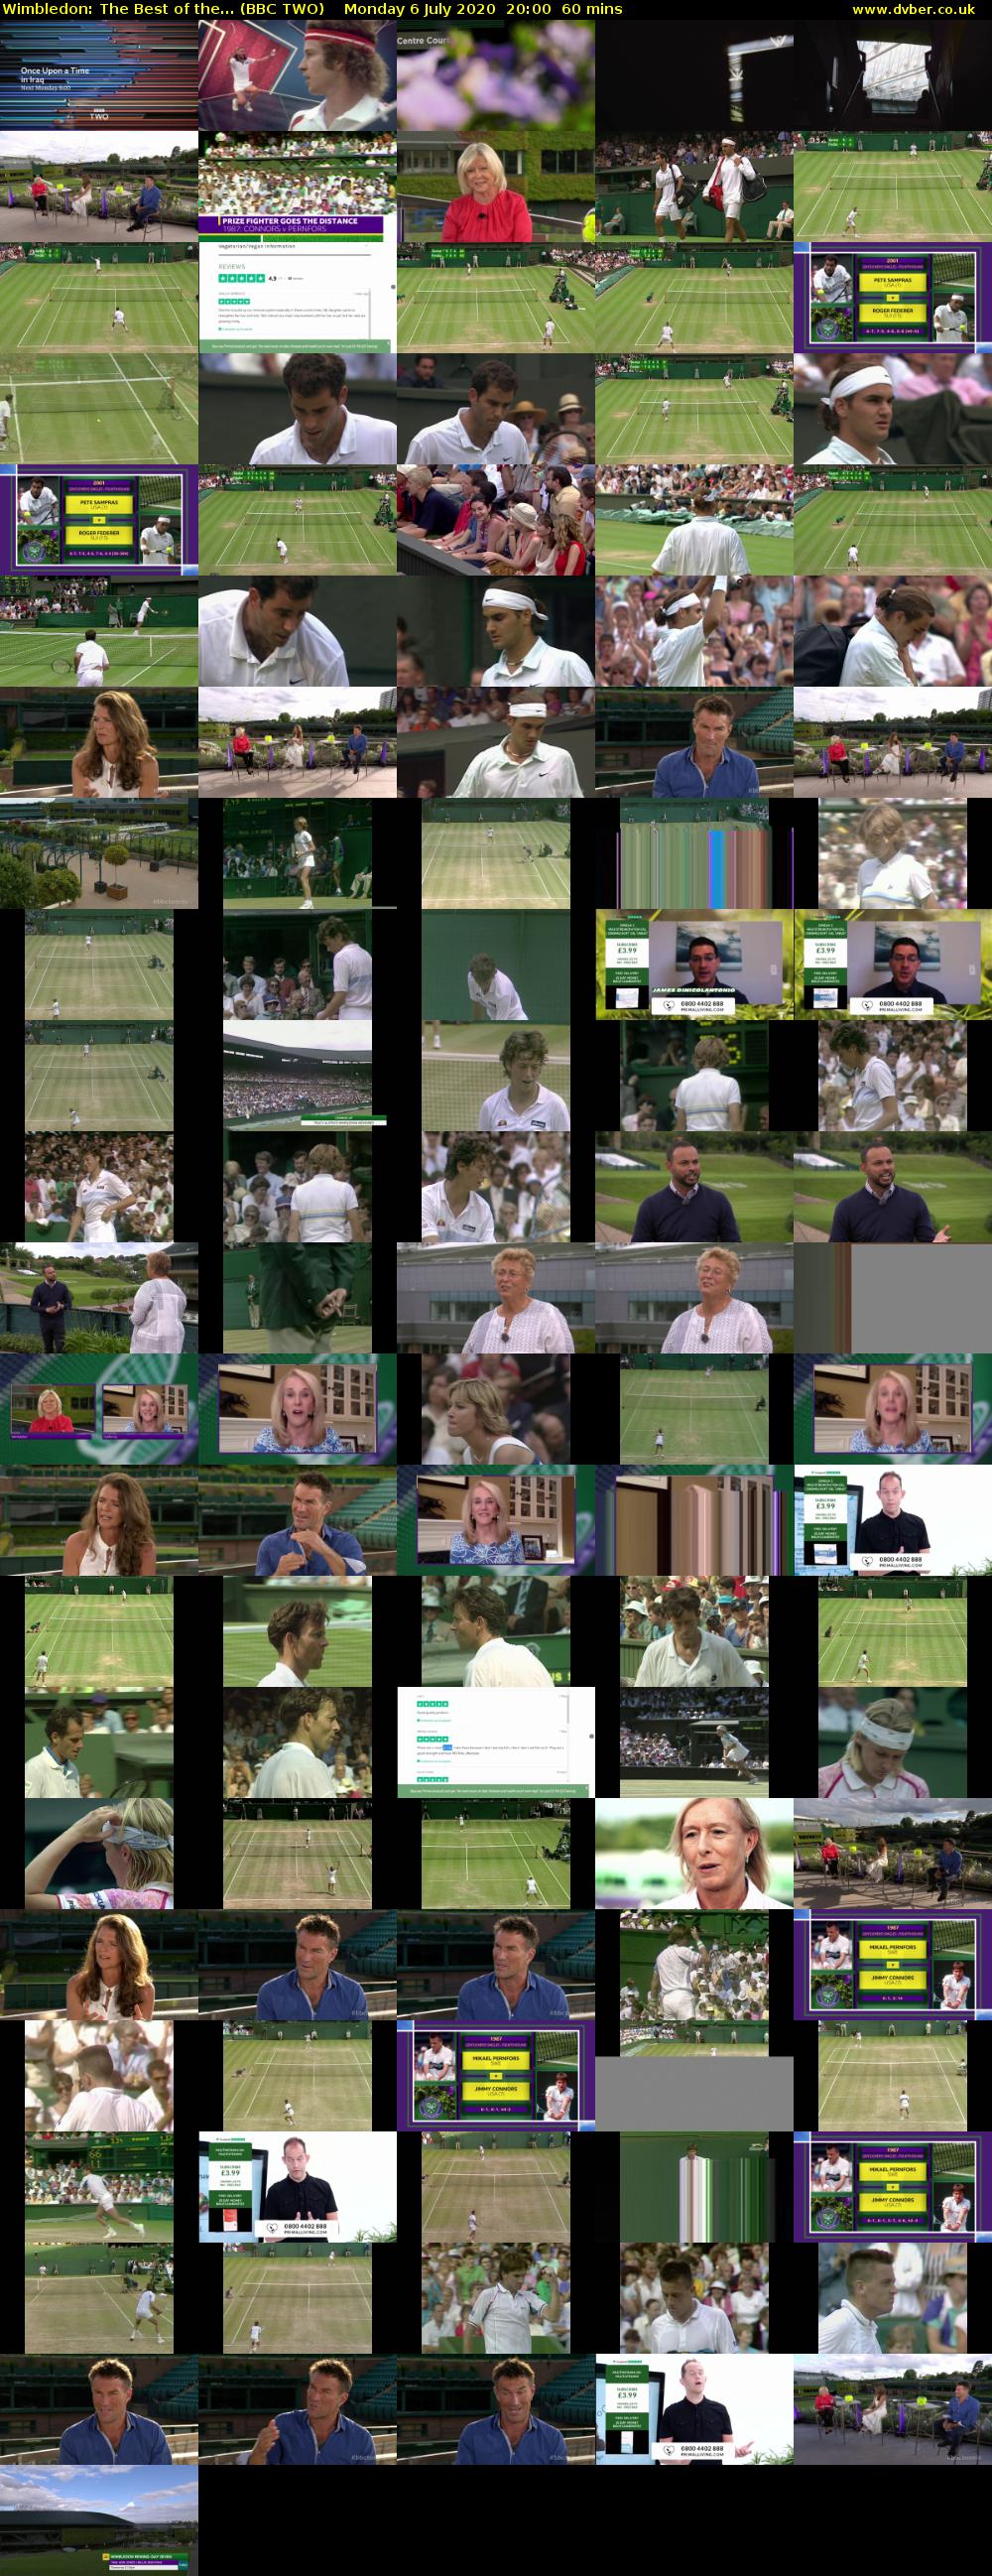 Wimbledon: The Best of the... (BBC TWO) Monday 6 July 2020 20:00 - 21:00